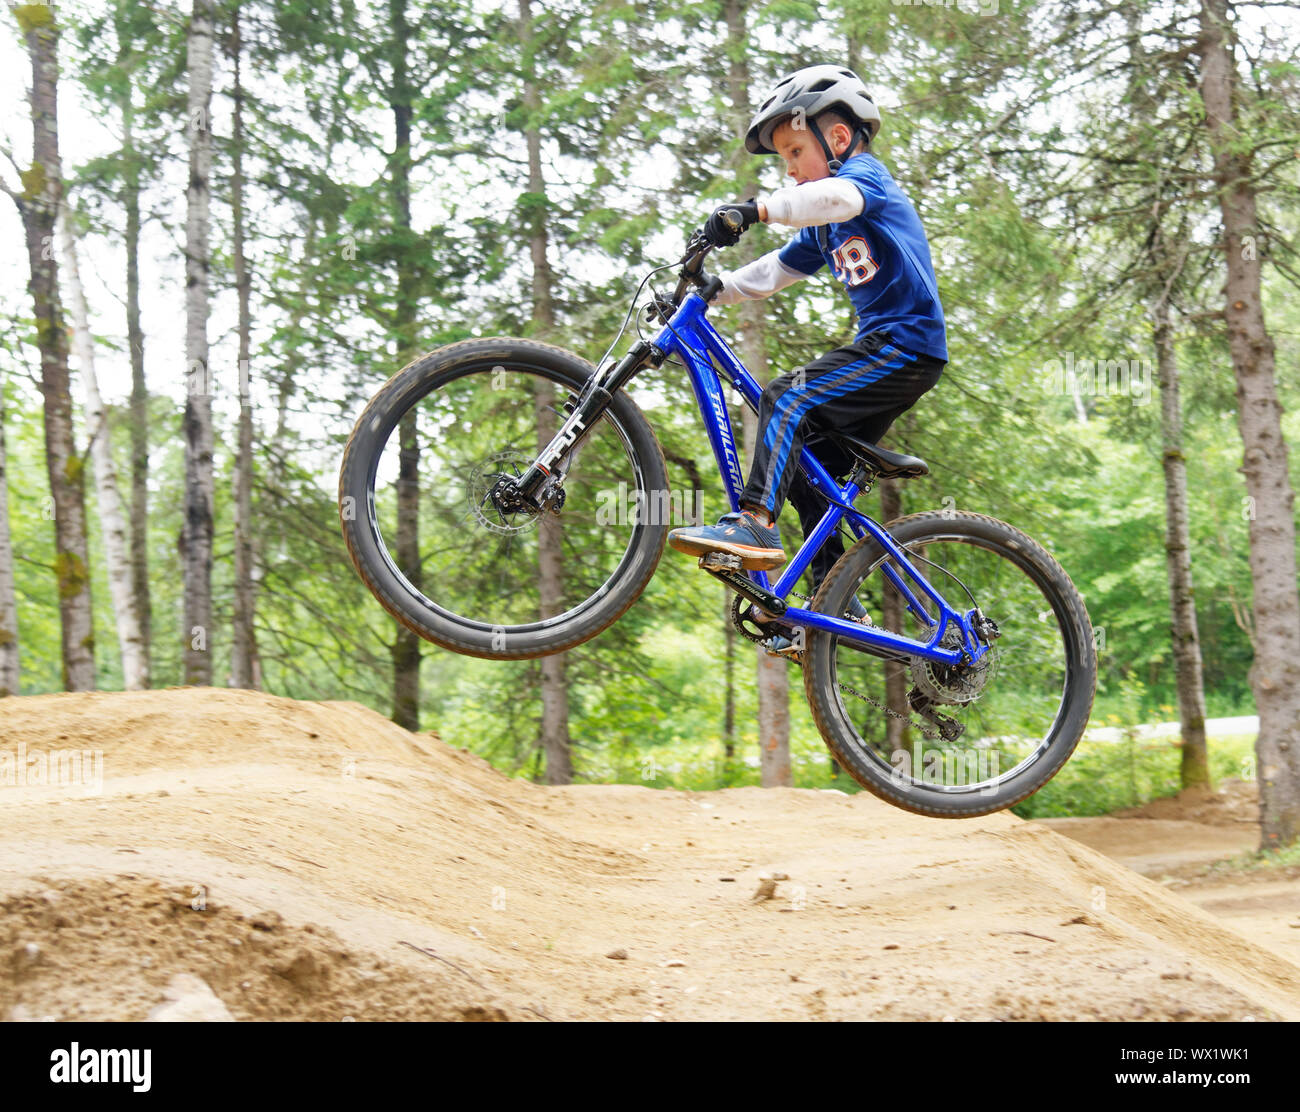 A seven year old boy doing jumps on his mountain bike Stock Photo